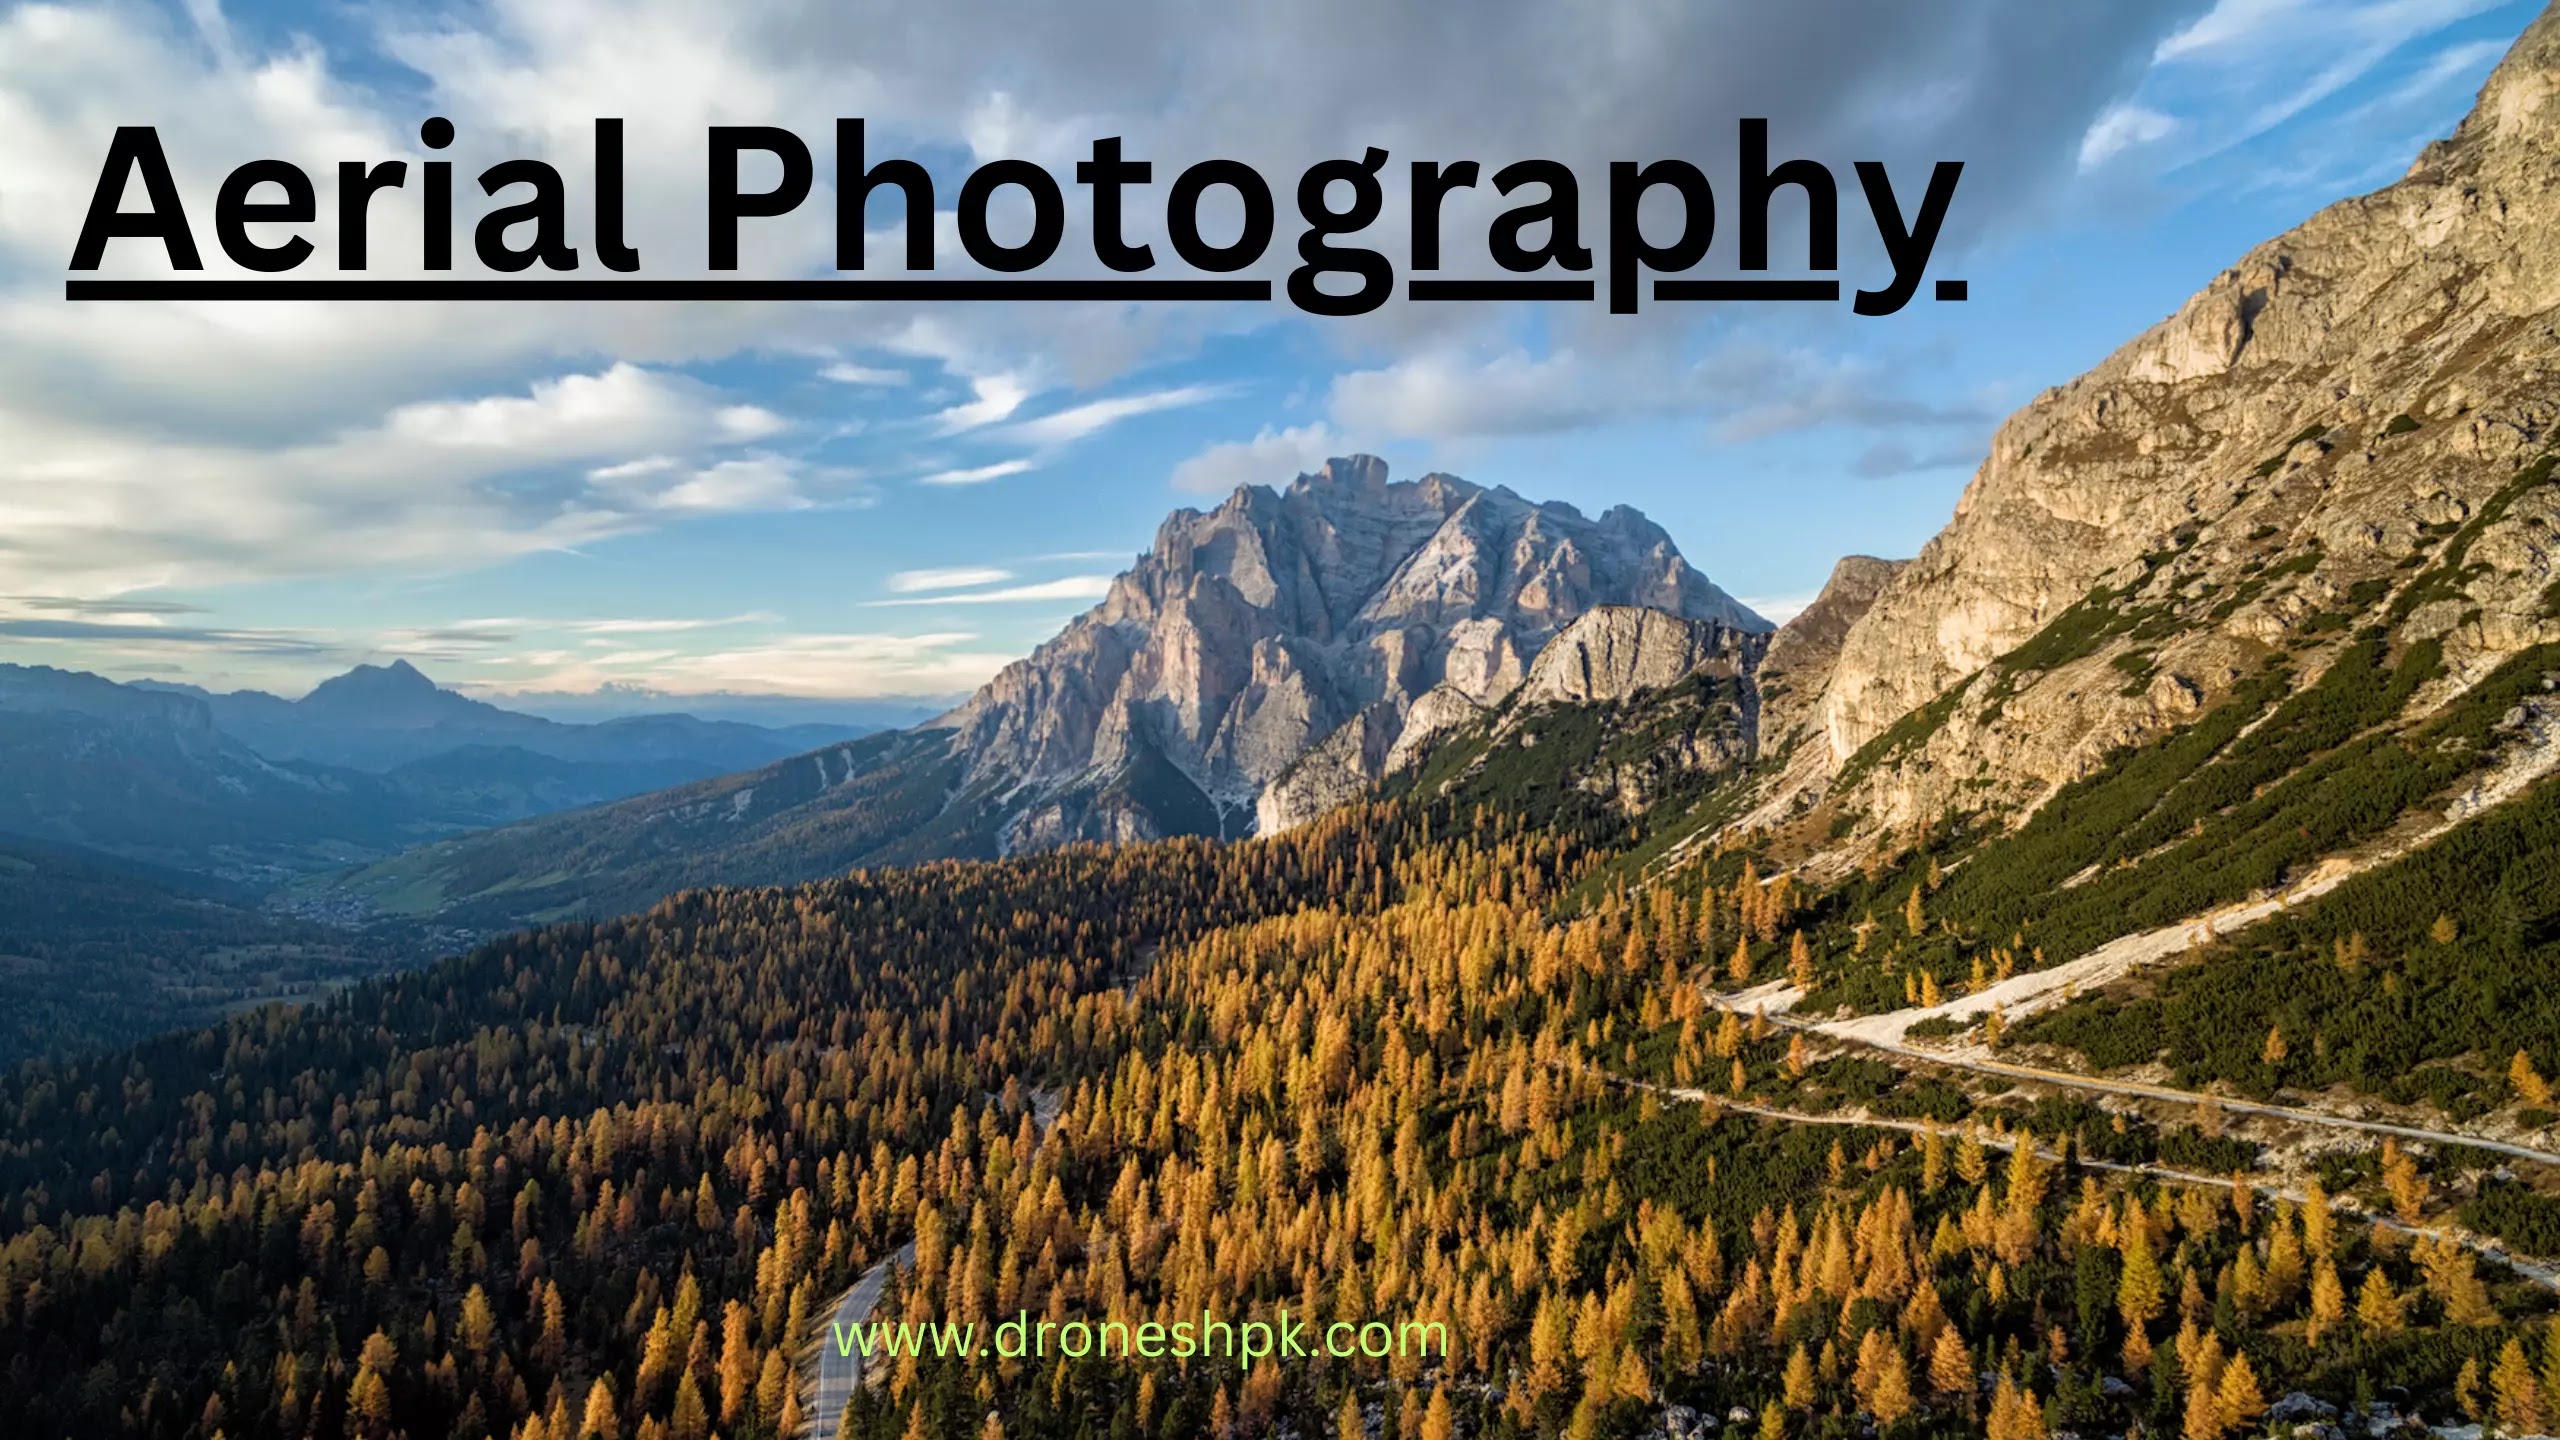 What are the Types of Aerial Photography